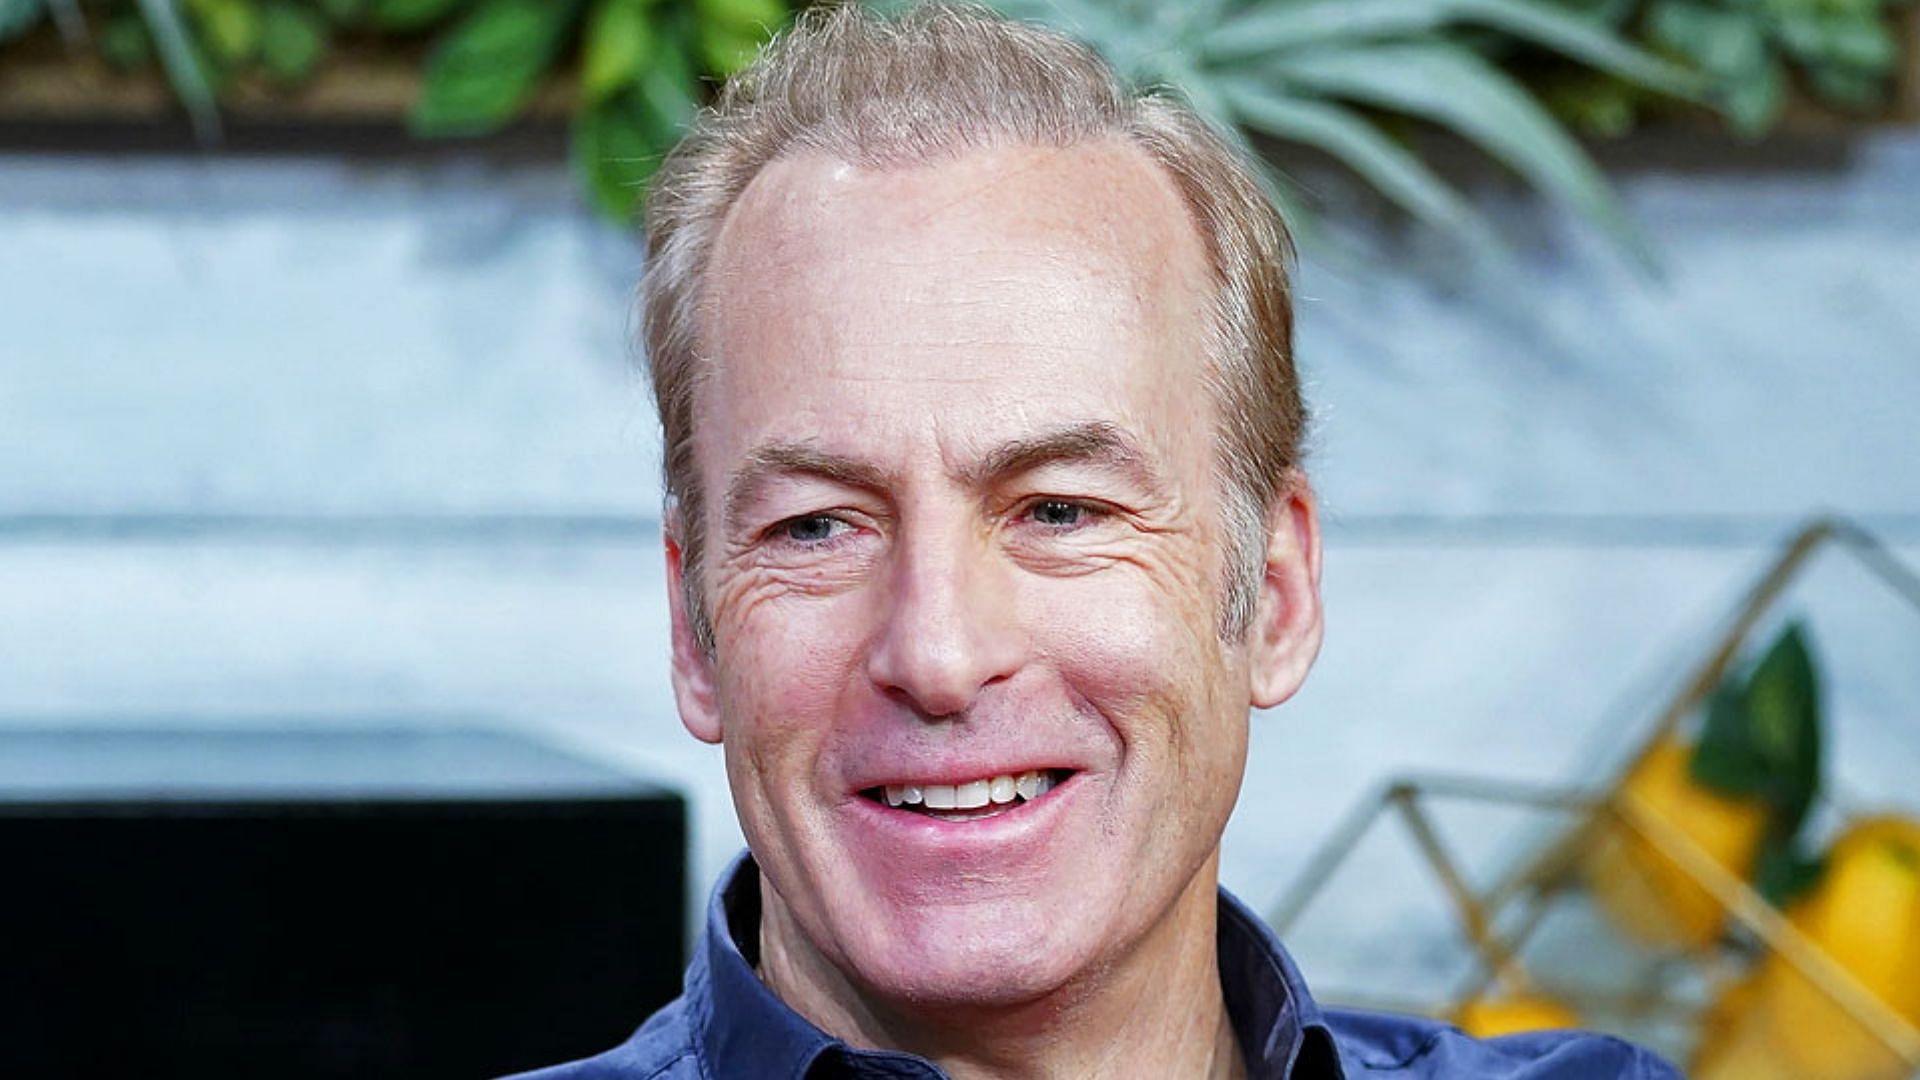 What Happened To Bob Odenkirk On The Sets Of Better Call Saul Season 6